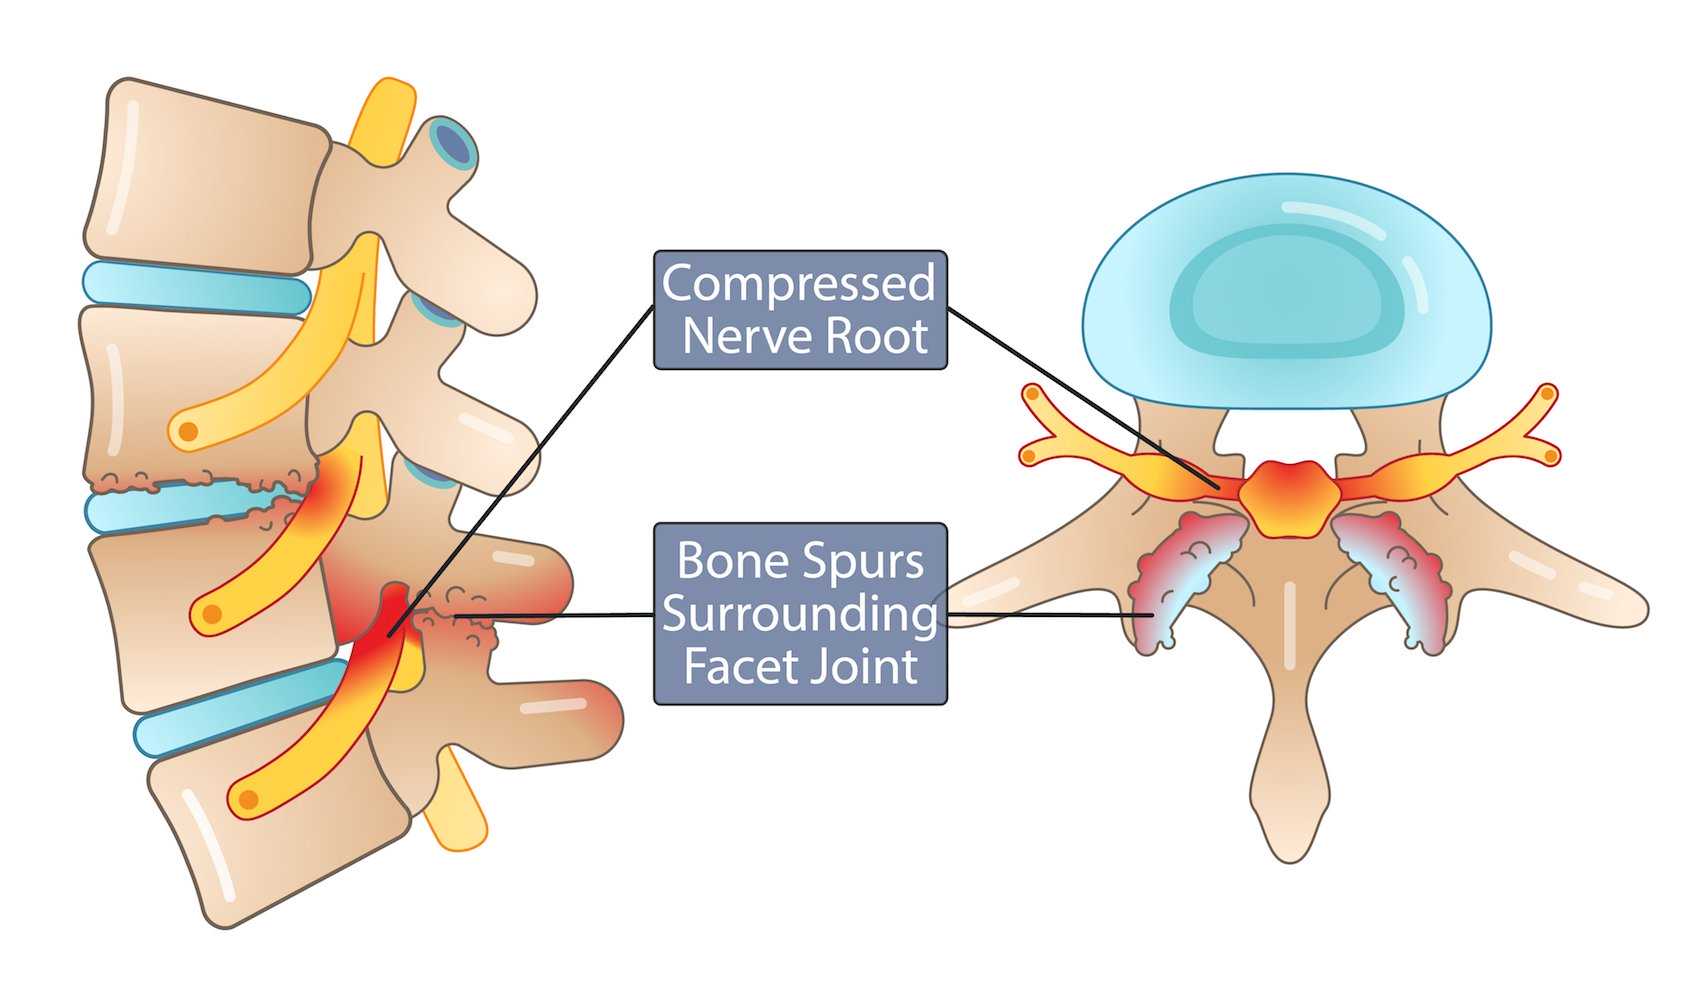 Facet Joint Syndrome Treatment - Compresses nerve root